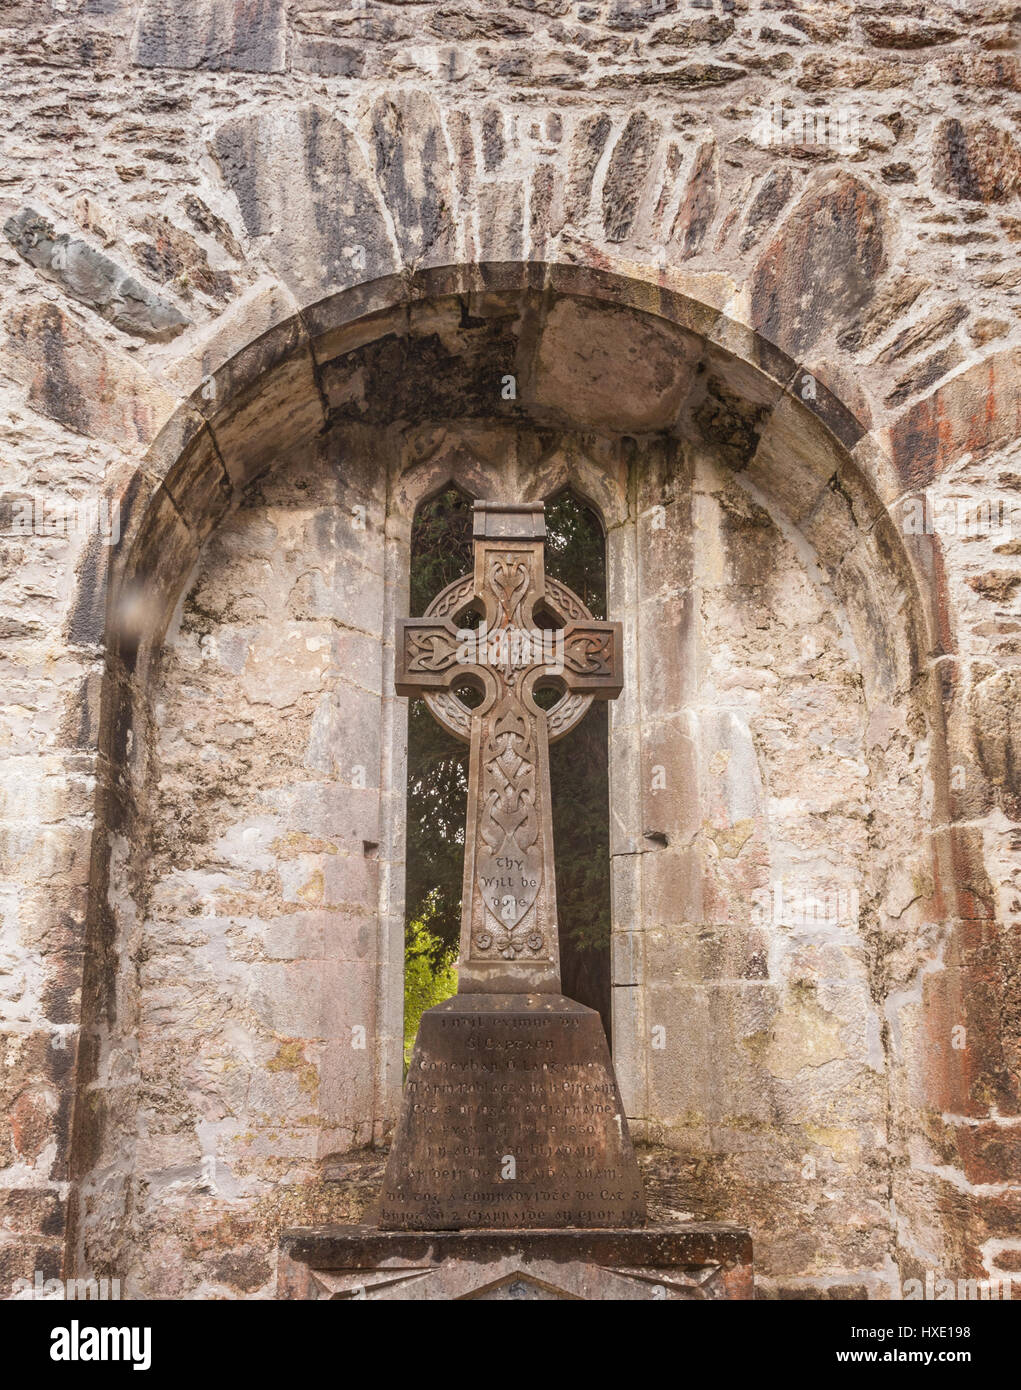 Celtic Cross in the archway of castle ruins in Ireland Stock Photo